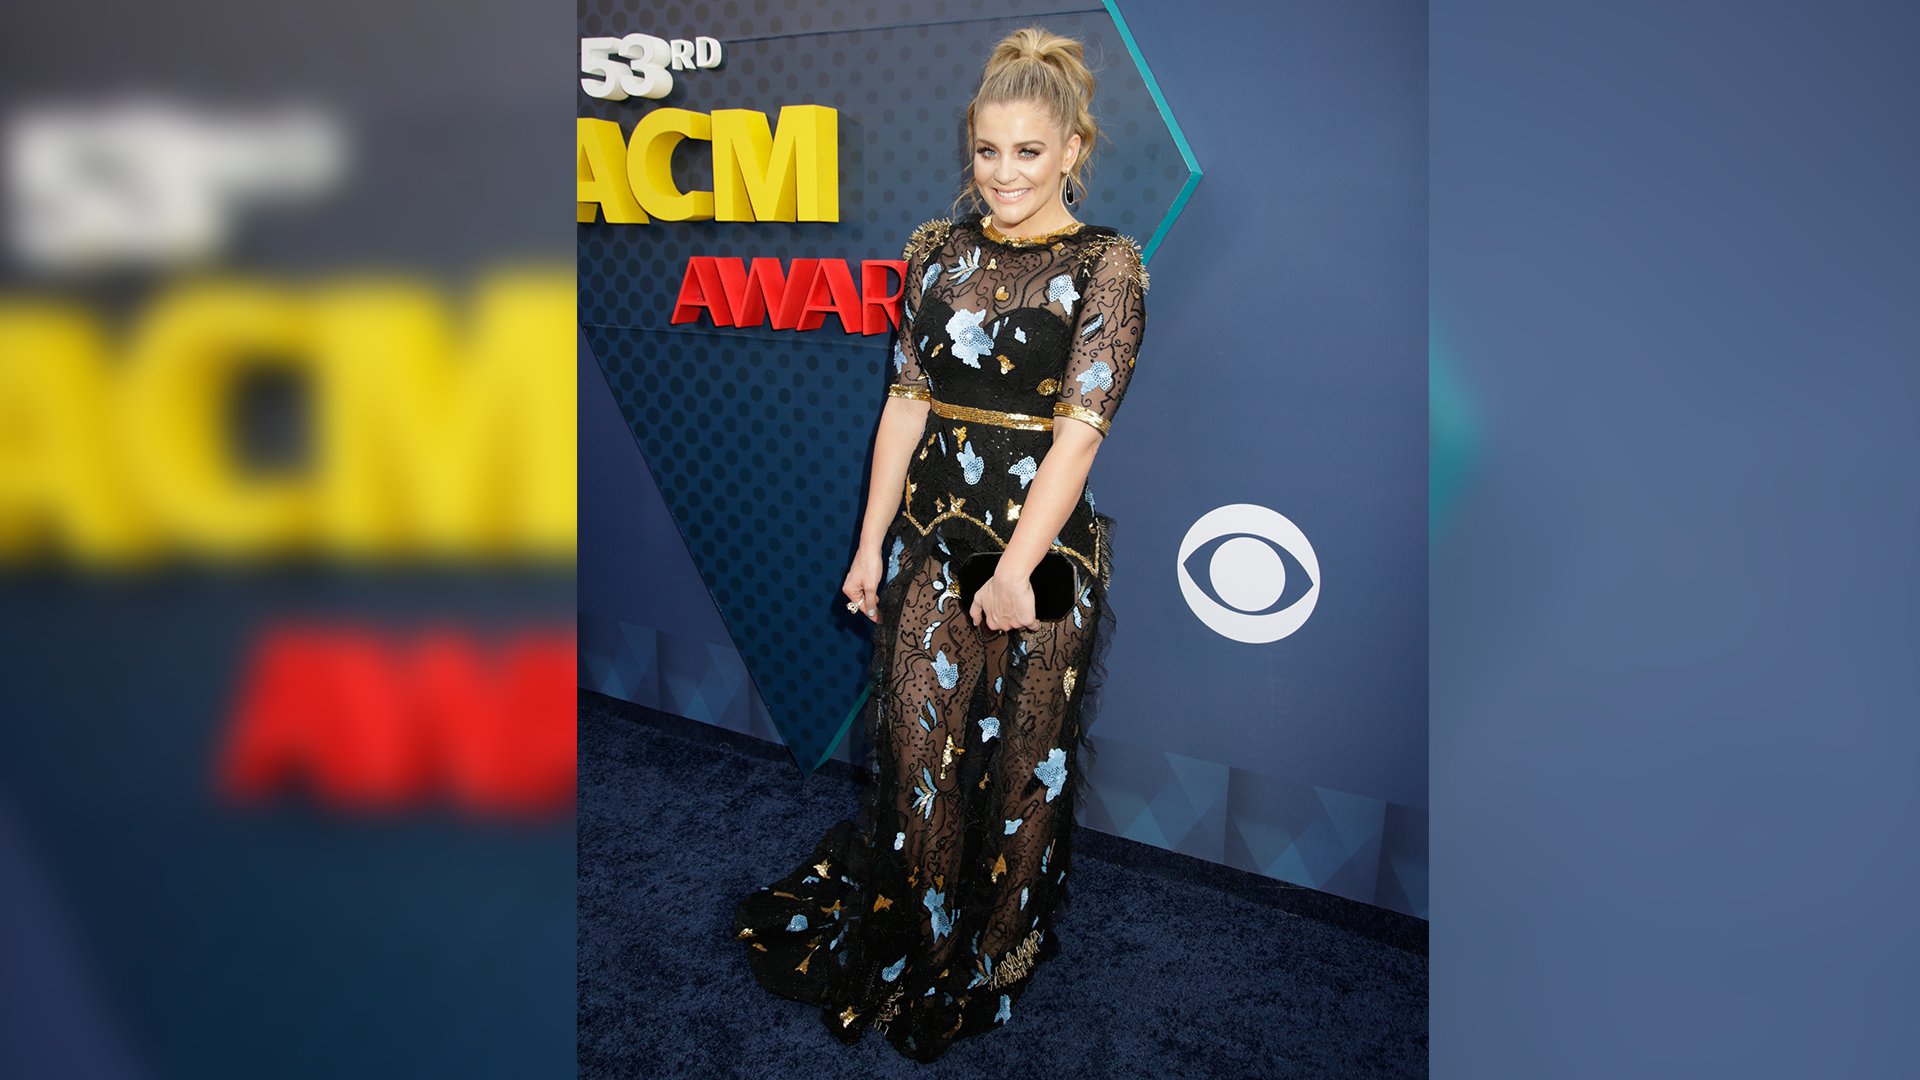 New Female Vocalist of the Year winner Lauren Alaina wears a high ponytail and heavenly black gown with floral appliqués.